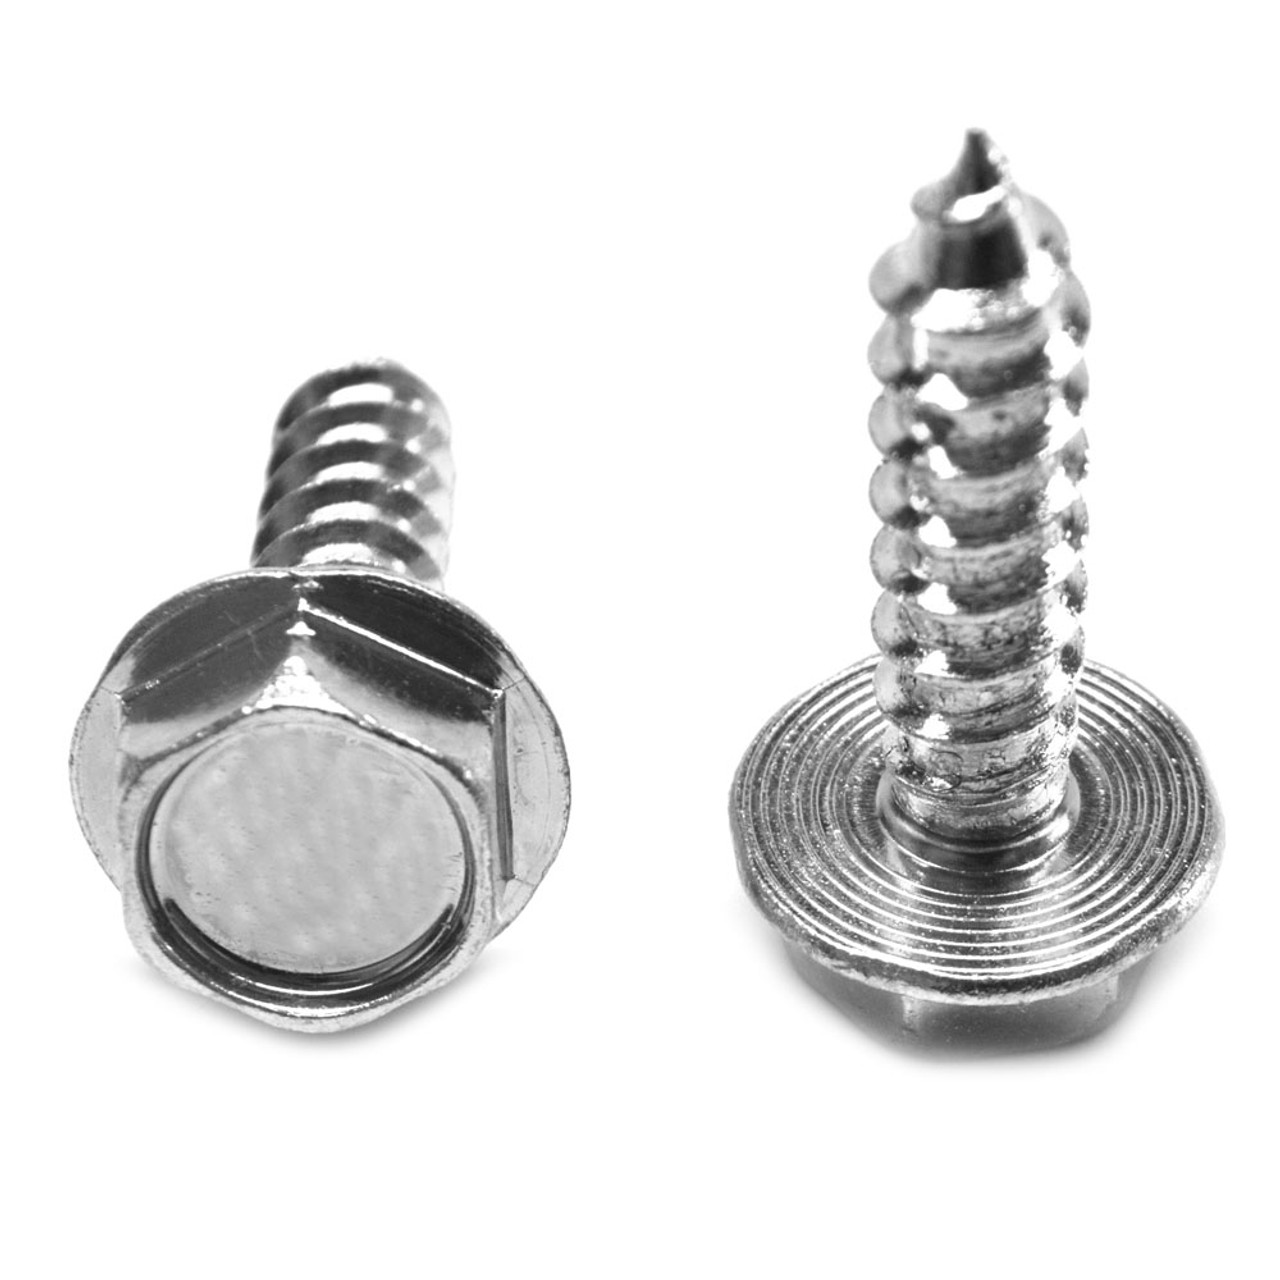 5/16-9 x 2 1/4 Hex Washer 7/16" AF Head Lag Screw Low Carbon Steel Zinc Plated